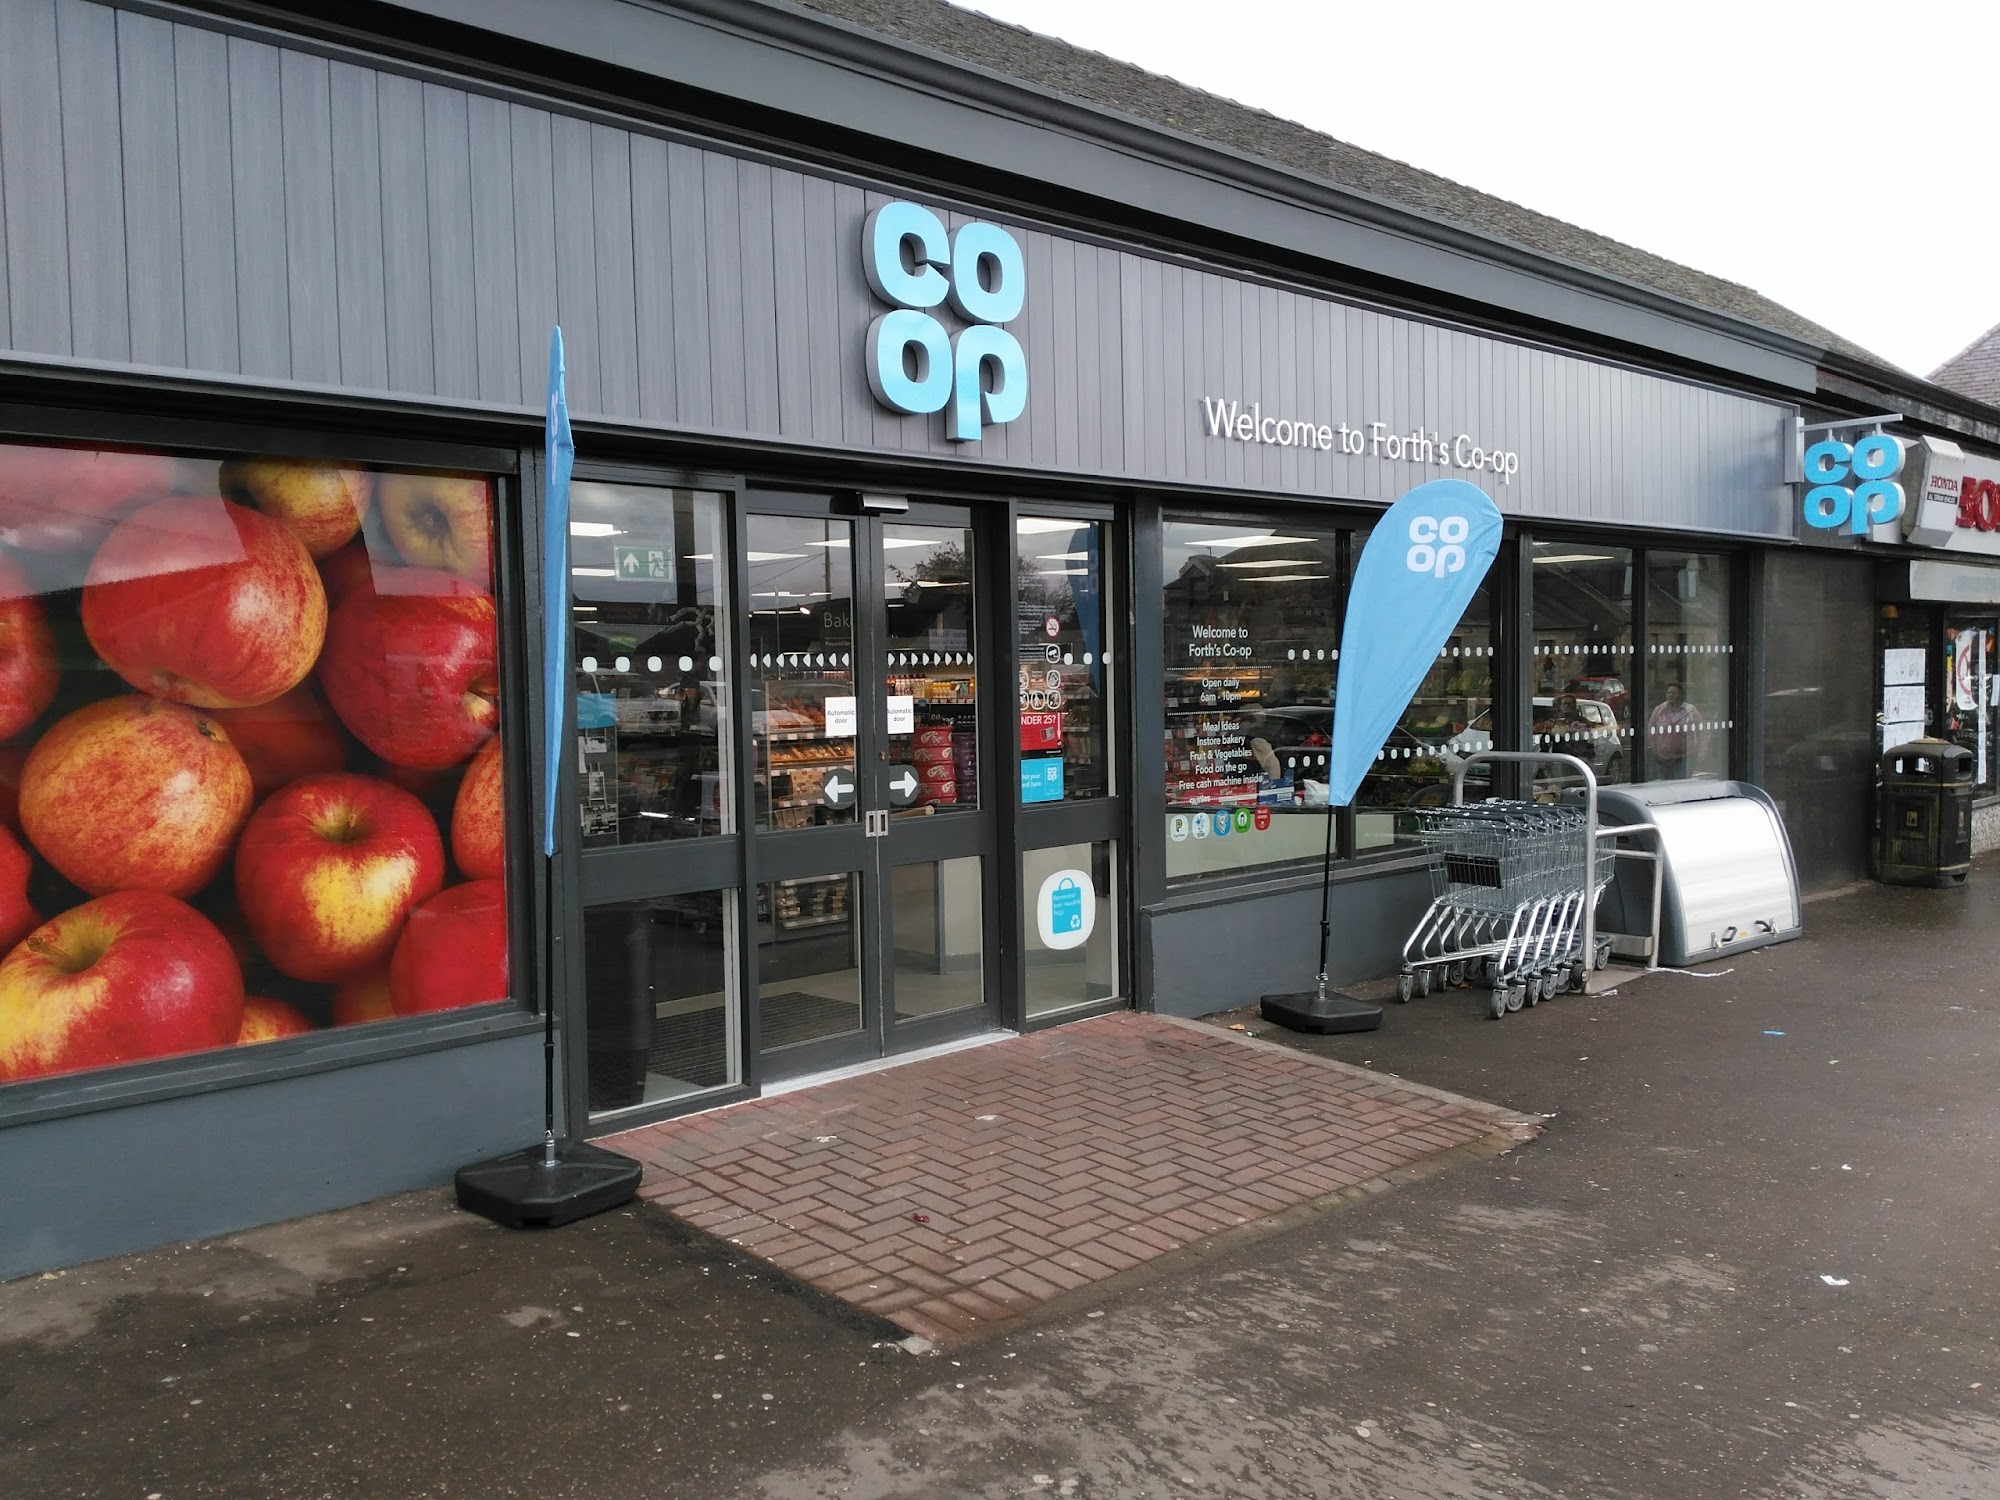 Co-op Food - Forth